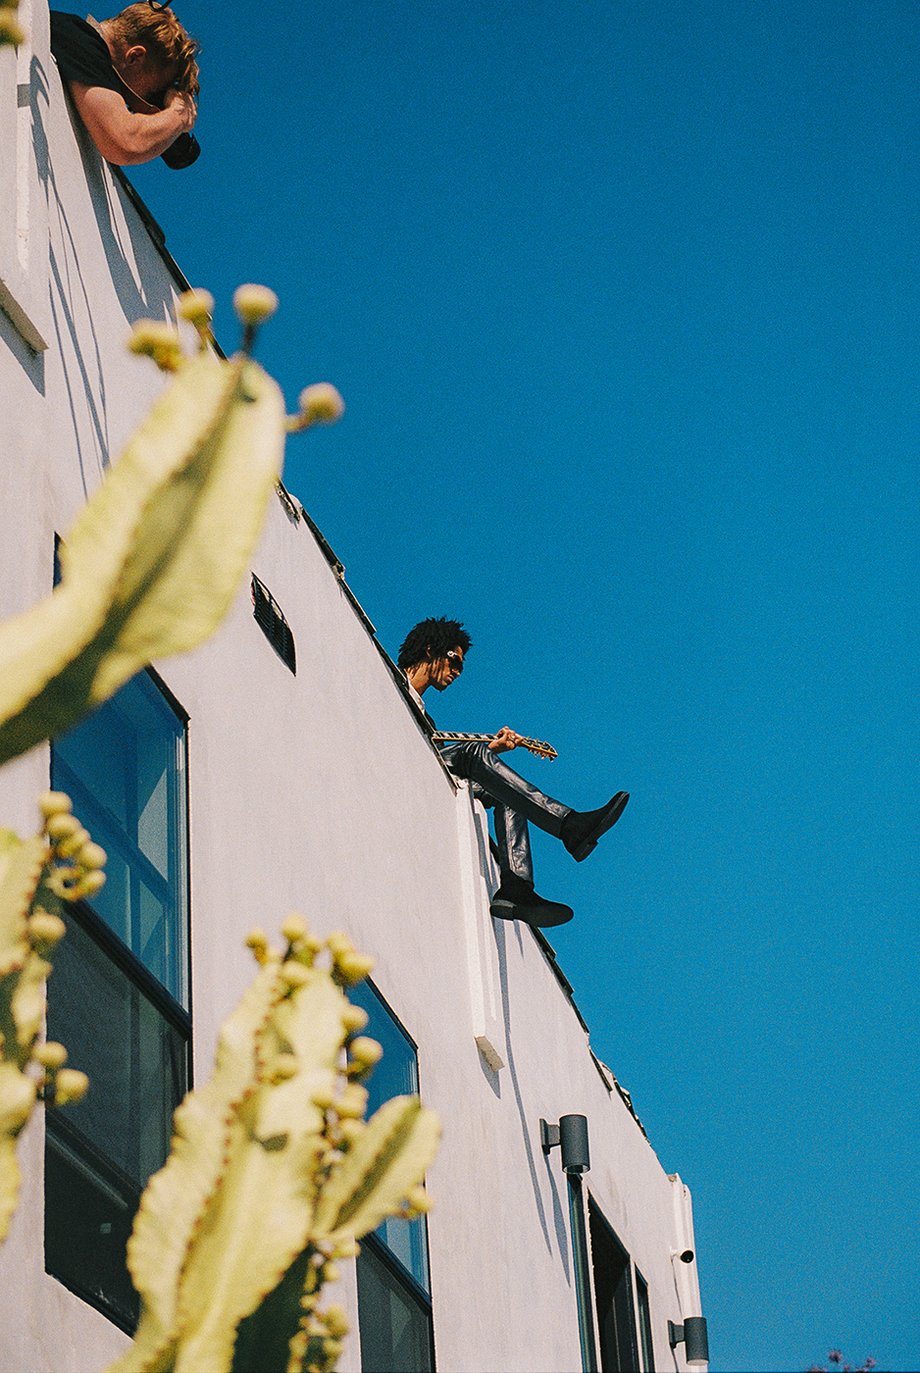 Model Jaxon Rose playing guitar on roof shot from below by Michael Julius for New Republic